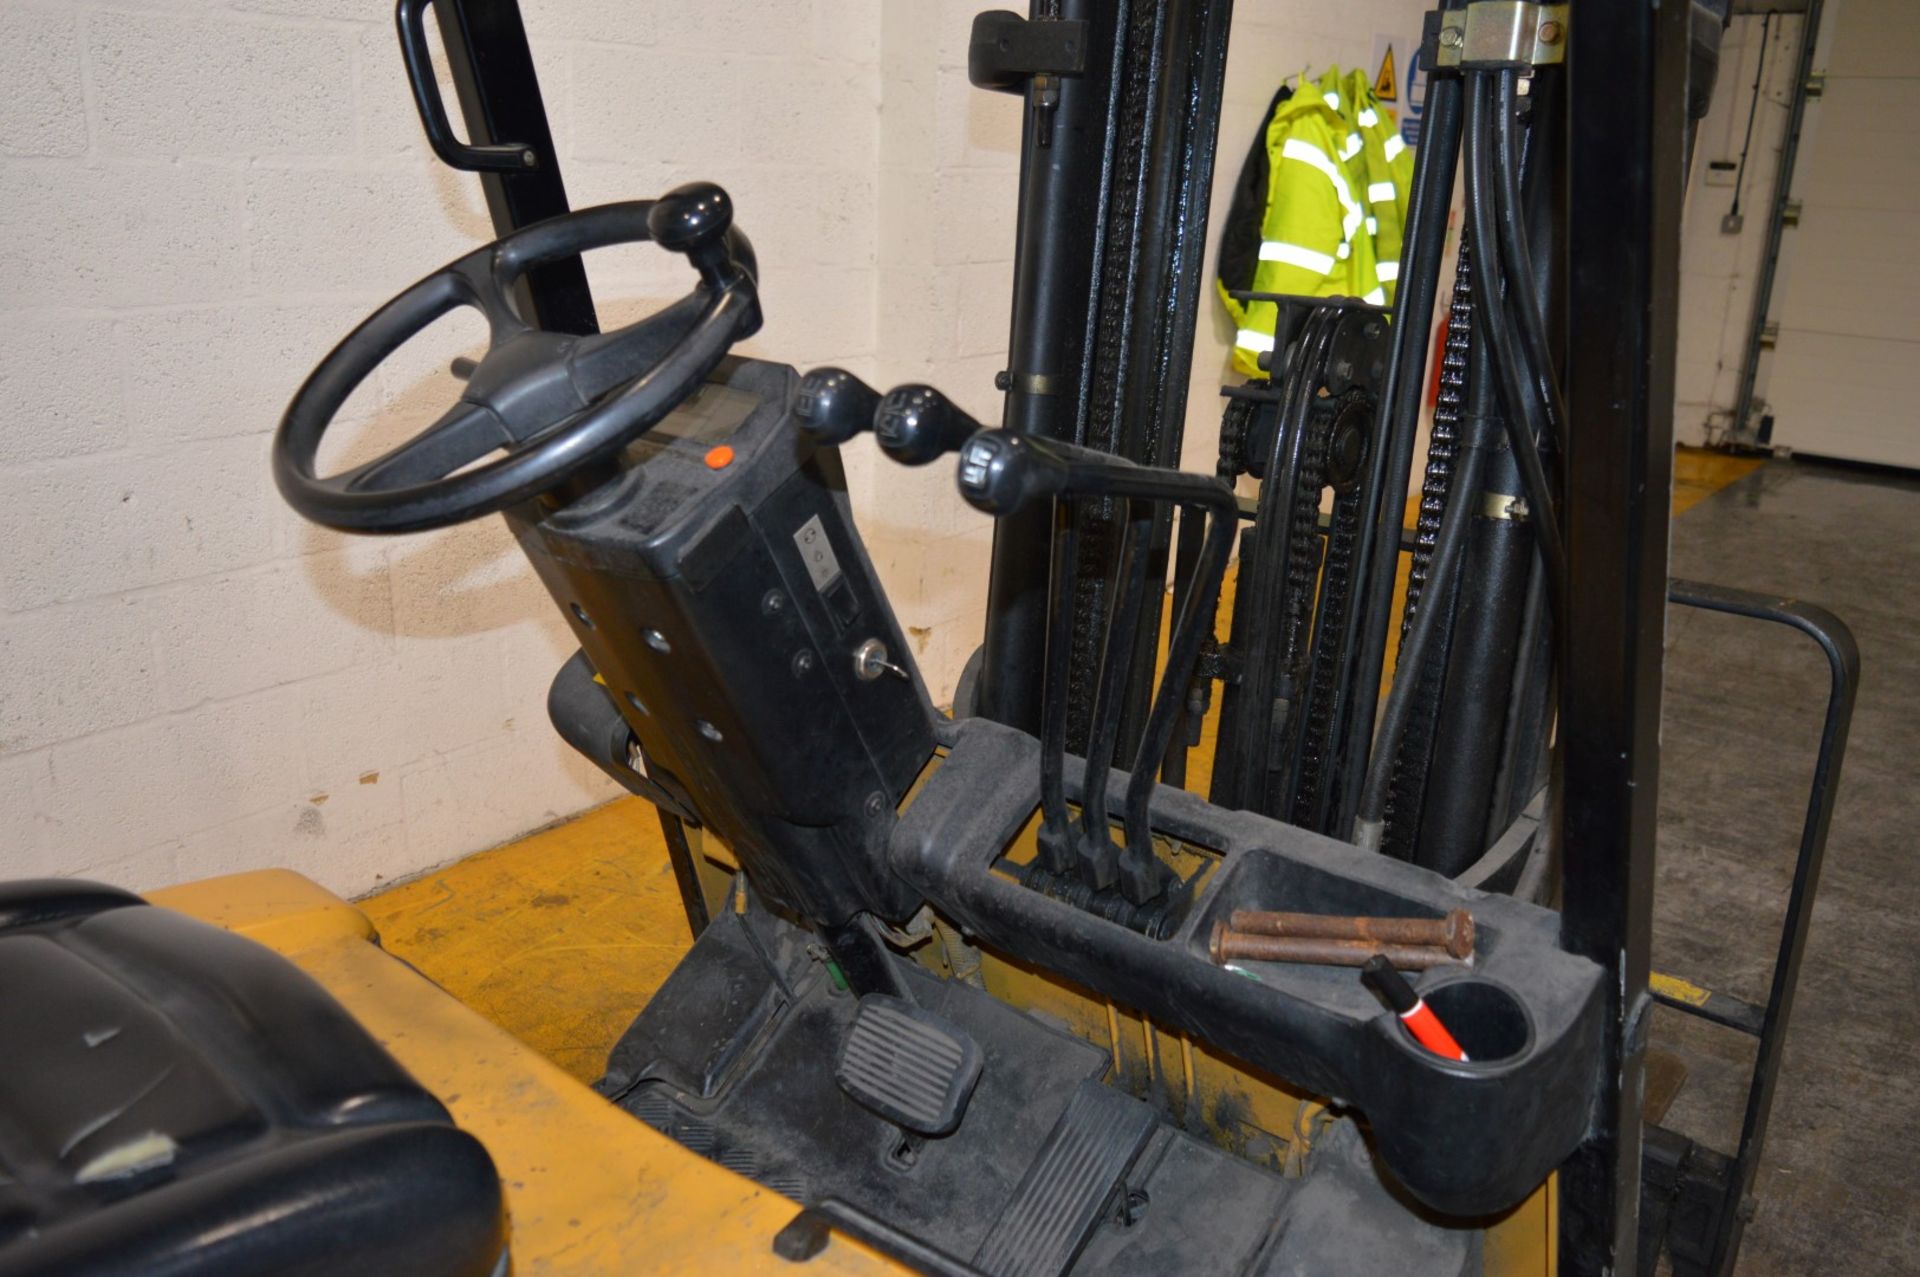 1 x Caterpillar Electric Counter Balance Forklift Truck - Model EP18KT - 1800kg Basic Capacity - - Image 11 of 14